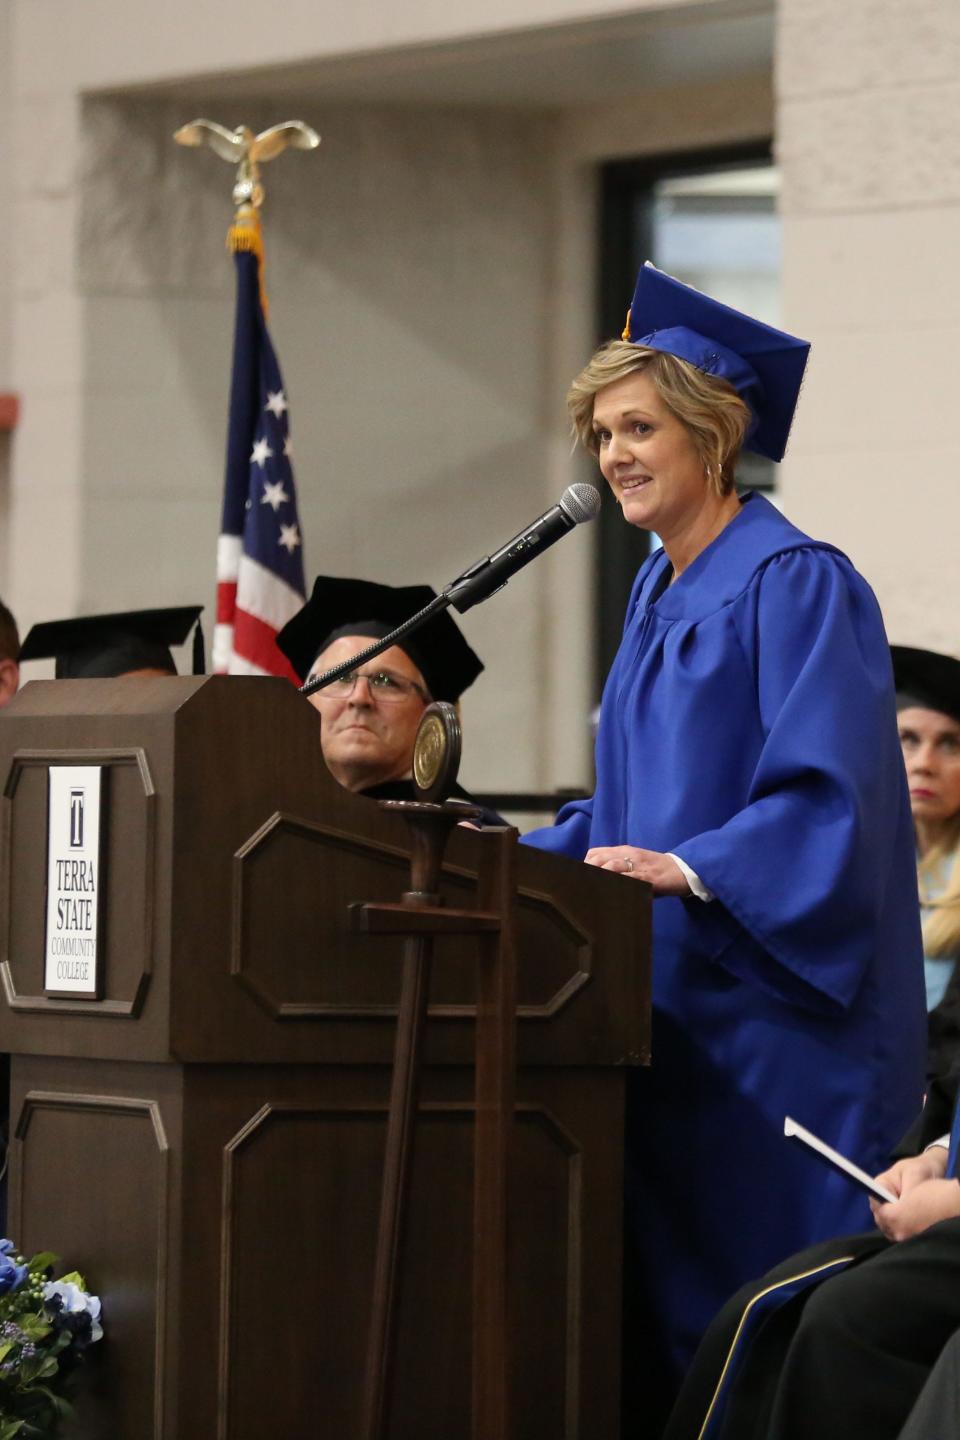 Brittany Goeller gave the student address at the 55th Commencement of Terra State Community College on May 10.